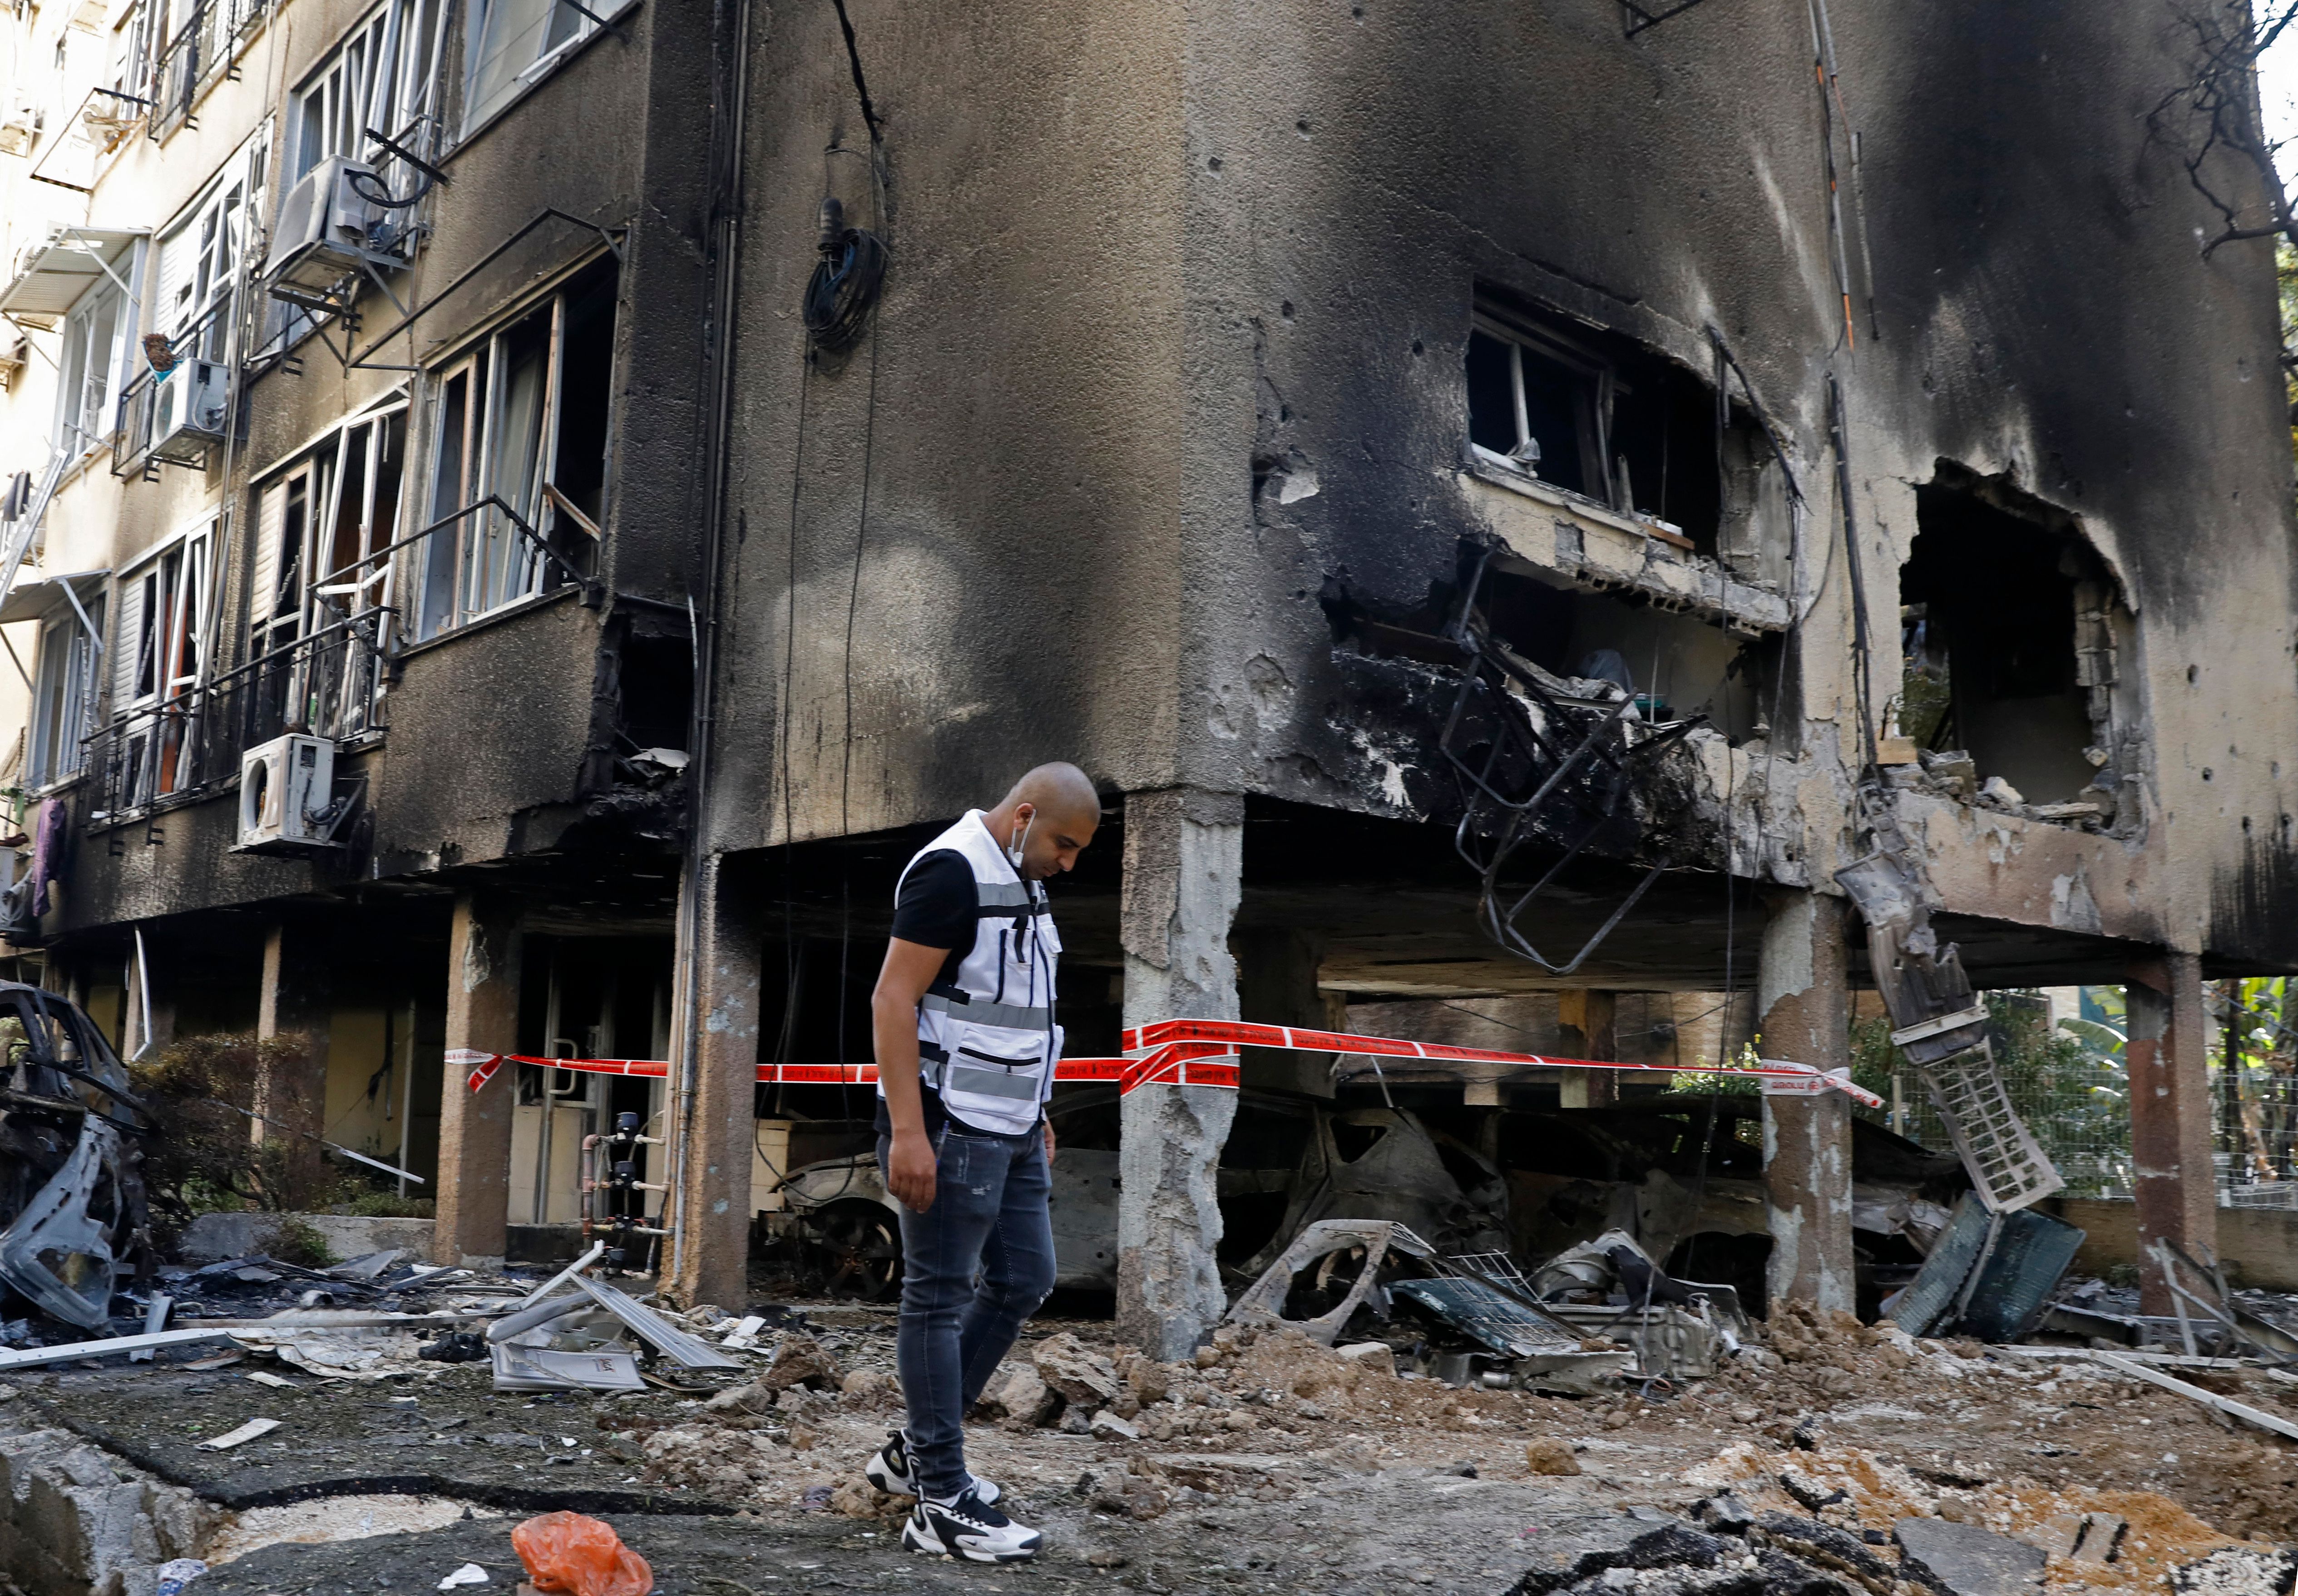 An Israeli man checks the damages after a rocket attack from the Hamas-controlled Gaza Strip, in the central Israeli city of Petah Tikva, on May 13